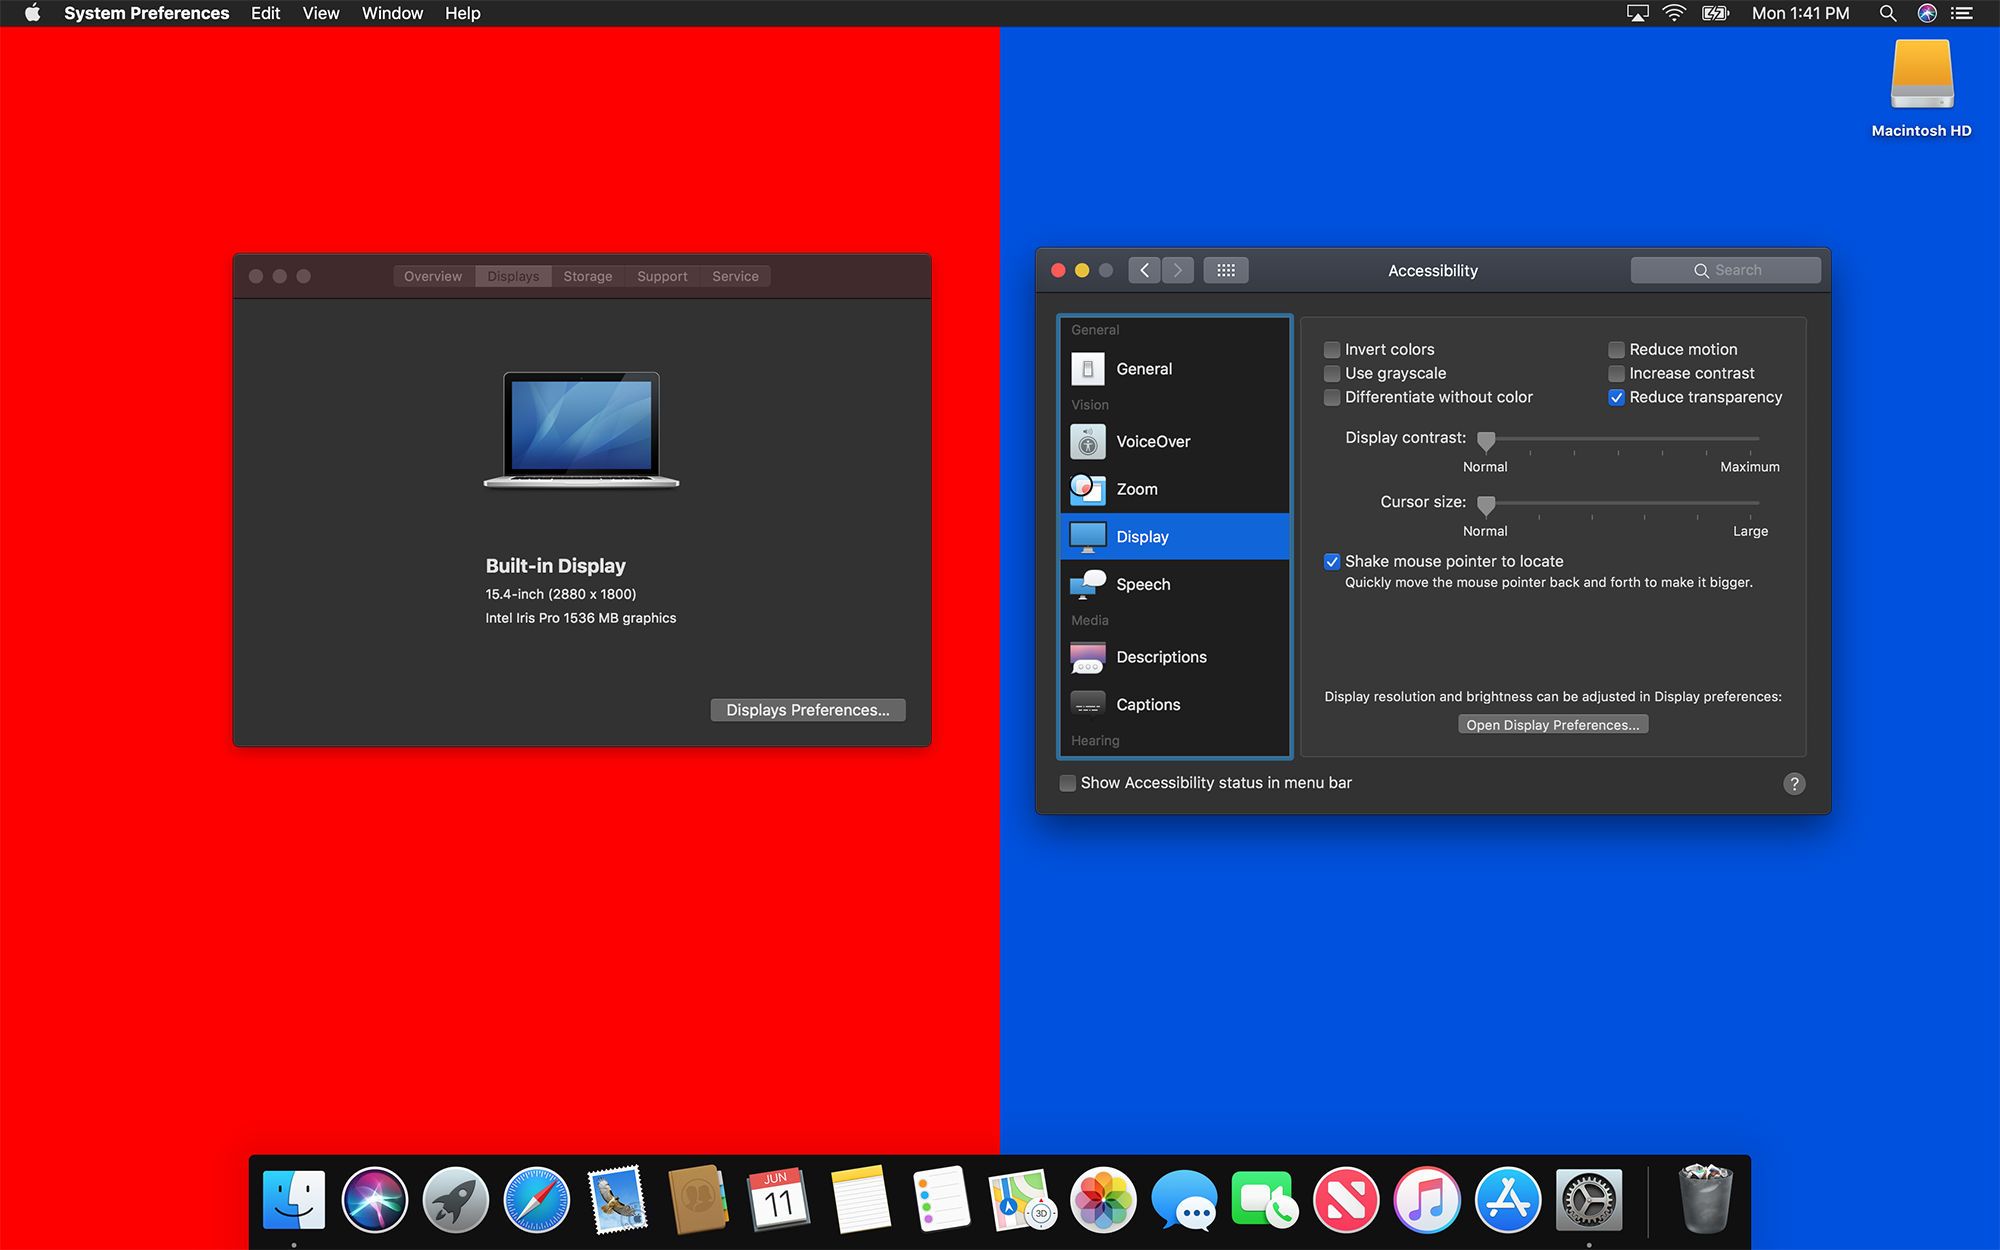 Reduce Transparency in Mojave